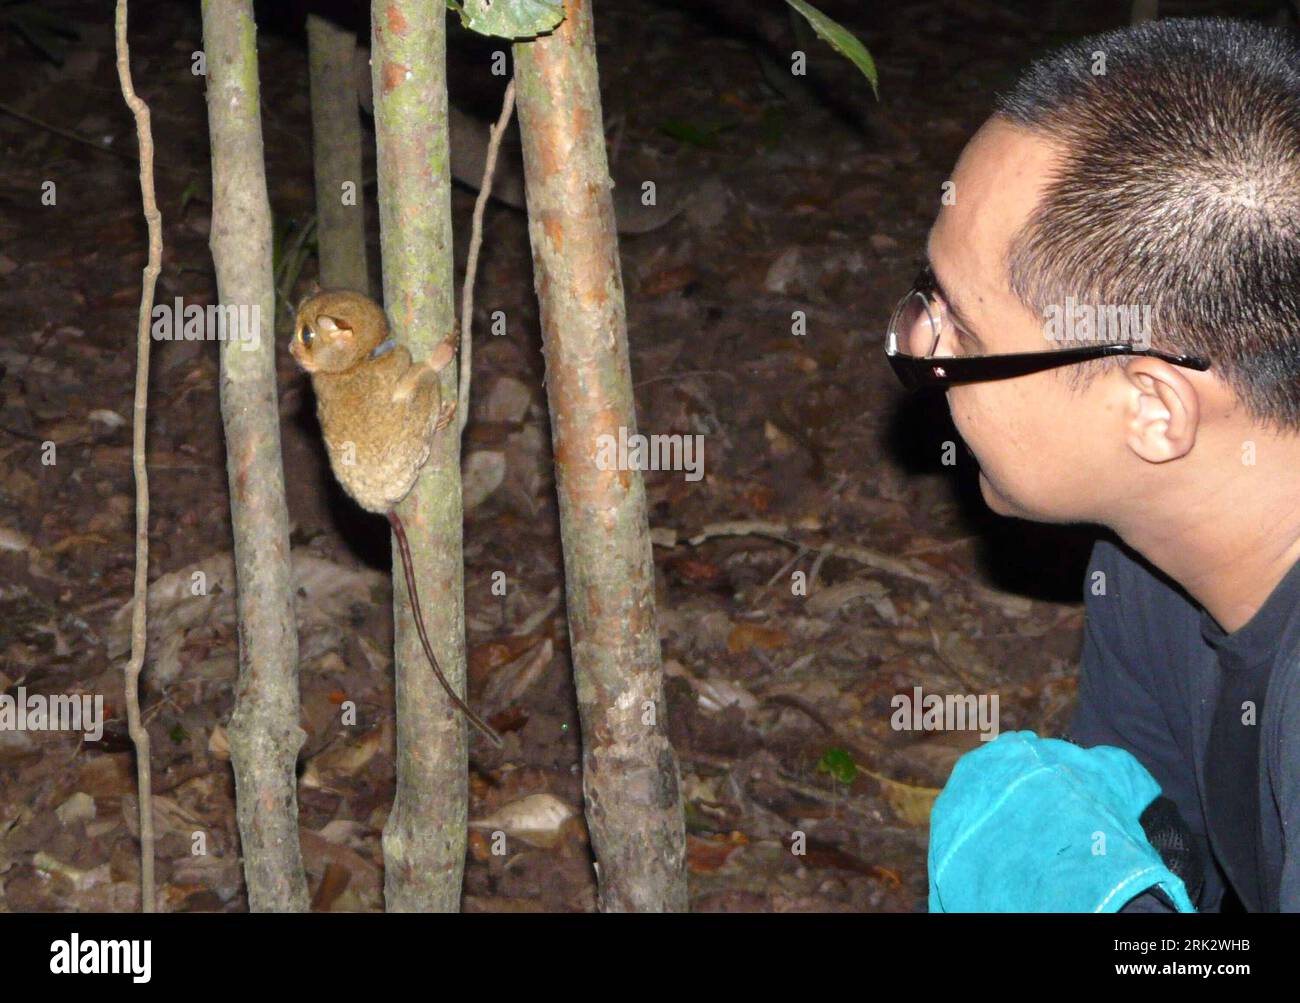 Bildnummer: 53256039  Datum: 08.08.2009  Copyright: imago/Xinhua (090811) -- KINABATANGAN, Aug. 11, 2009 (Xinhua) -- A researcher frees a male tarsier back to the forest after setting a tracing equipment on it in Kinabatangan of Sabah State, east Malaysia, Aug. 8, 2009. Tarsiers, which are 85 to 160 millimeters long and weigh 80 to 165 grams, are one of the smallest and rarest primates in the world. (Xinhua) (gj) (3)MALAYSIA-KINABATANGAN-TARSIER  PUBLICATIONxNOTxINxCHN  premiumd Tiere Tarsier Affe kbdig xdp  2009 quer  Koboldmaki    Bildnummer 53256039 Date 08 08 2009 Copyright Imago XINHUA  K Stock Photo